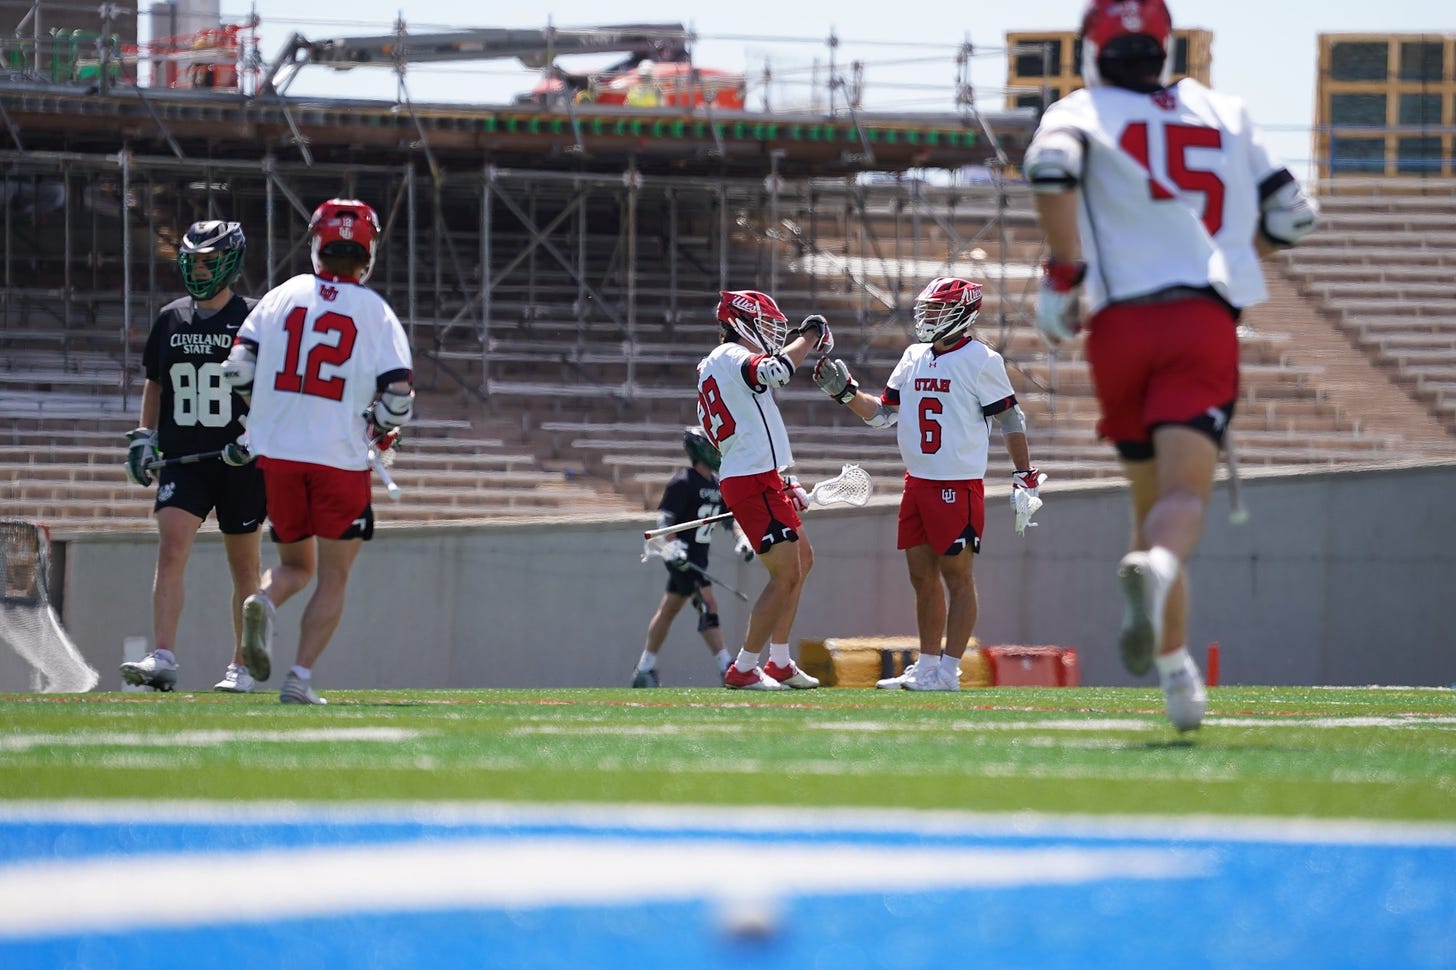 Utah Lacrosse Advances To ASUN Championship With 21-5 Win Over Cleveland  State - University of Utah Athletics